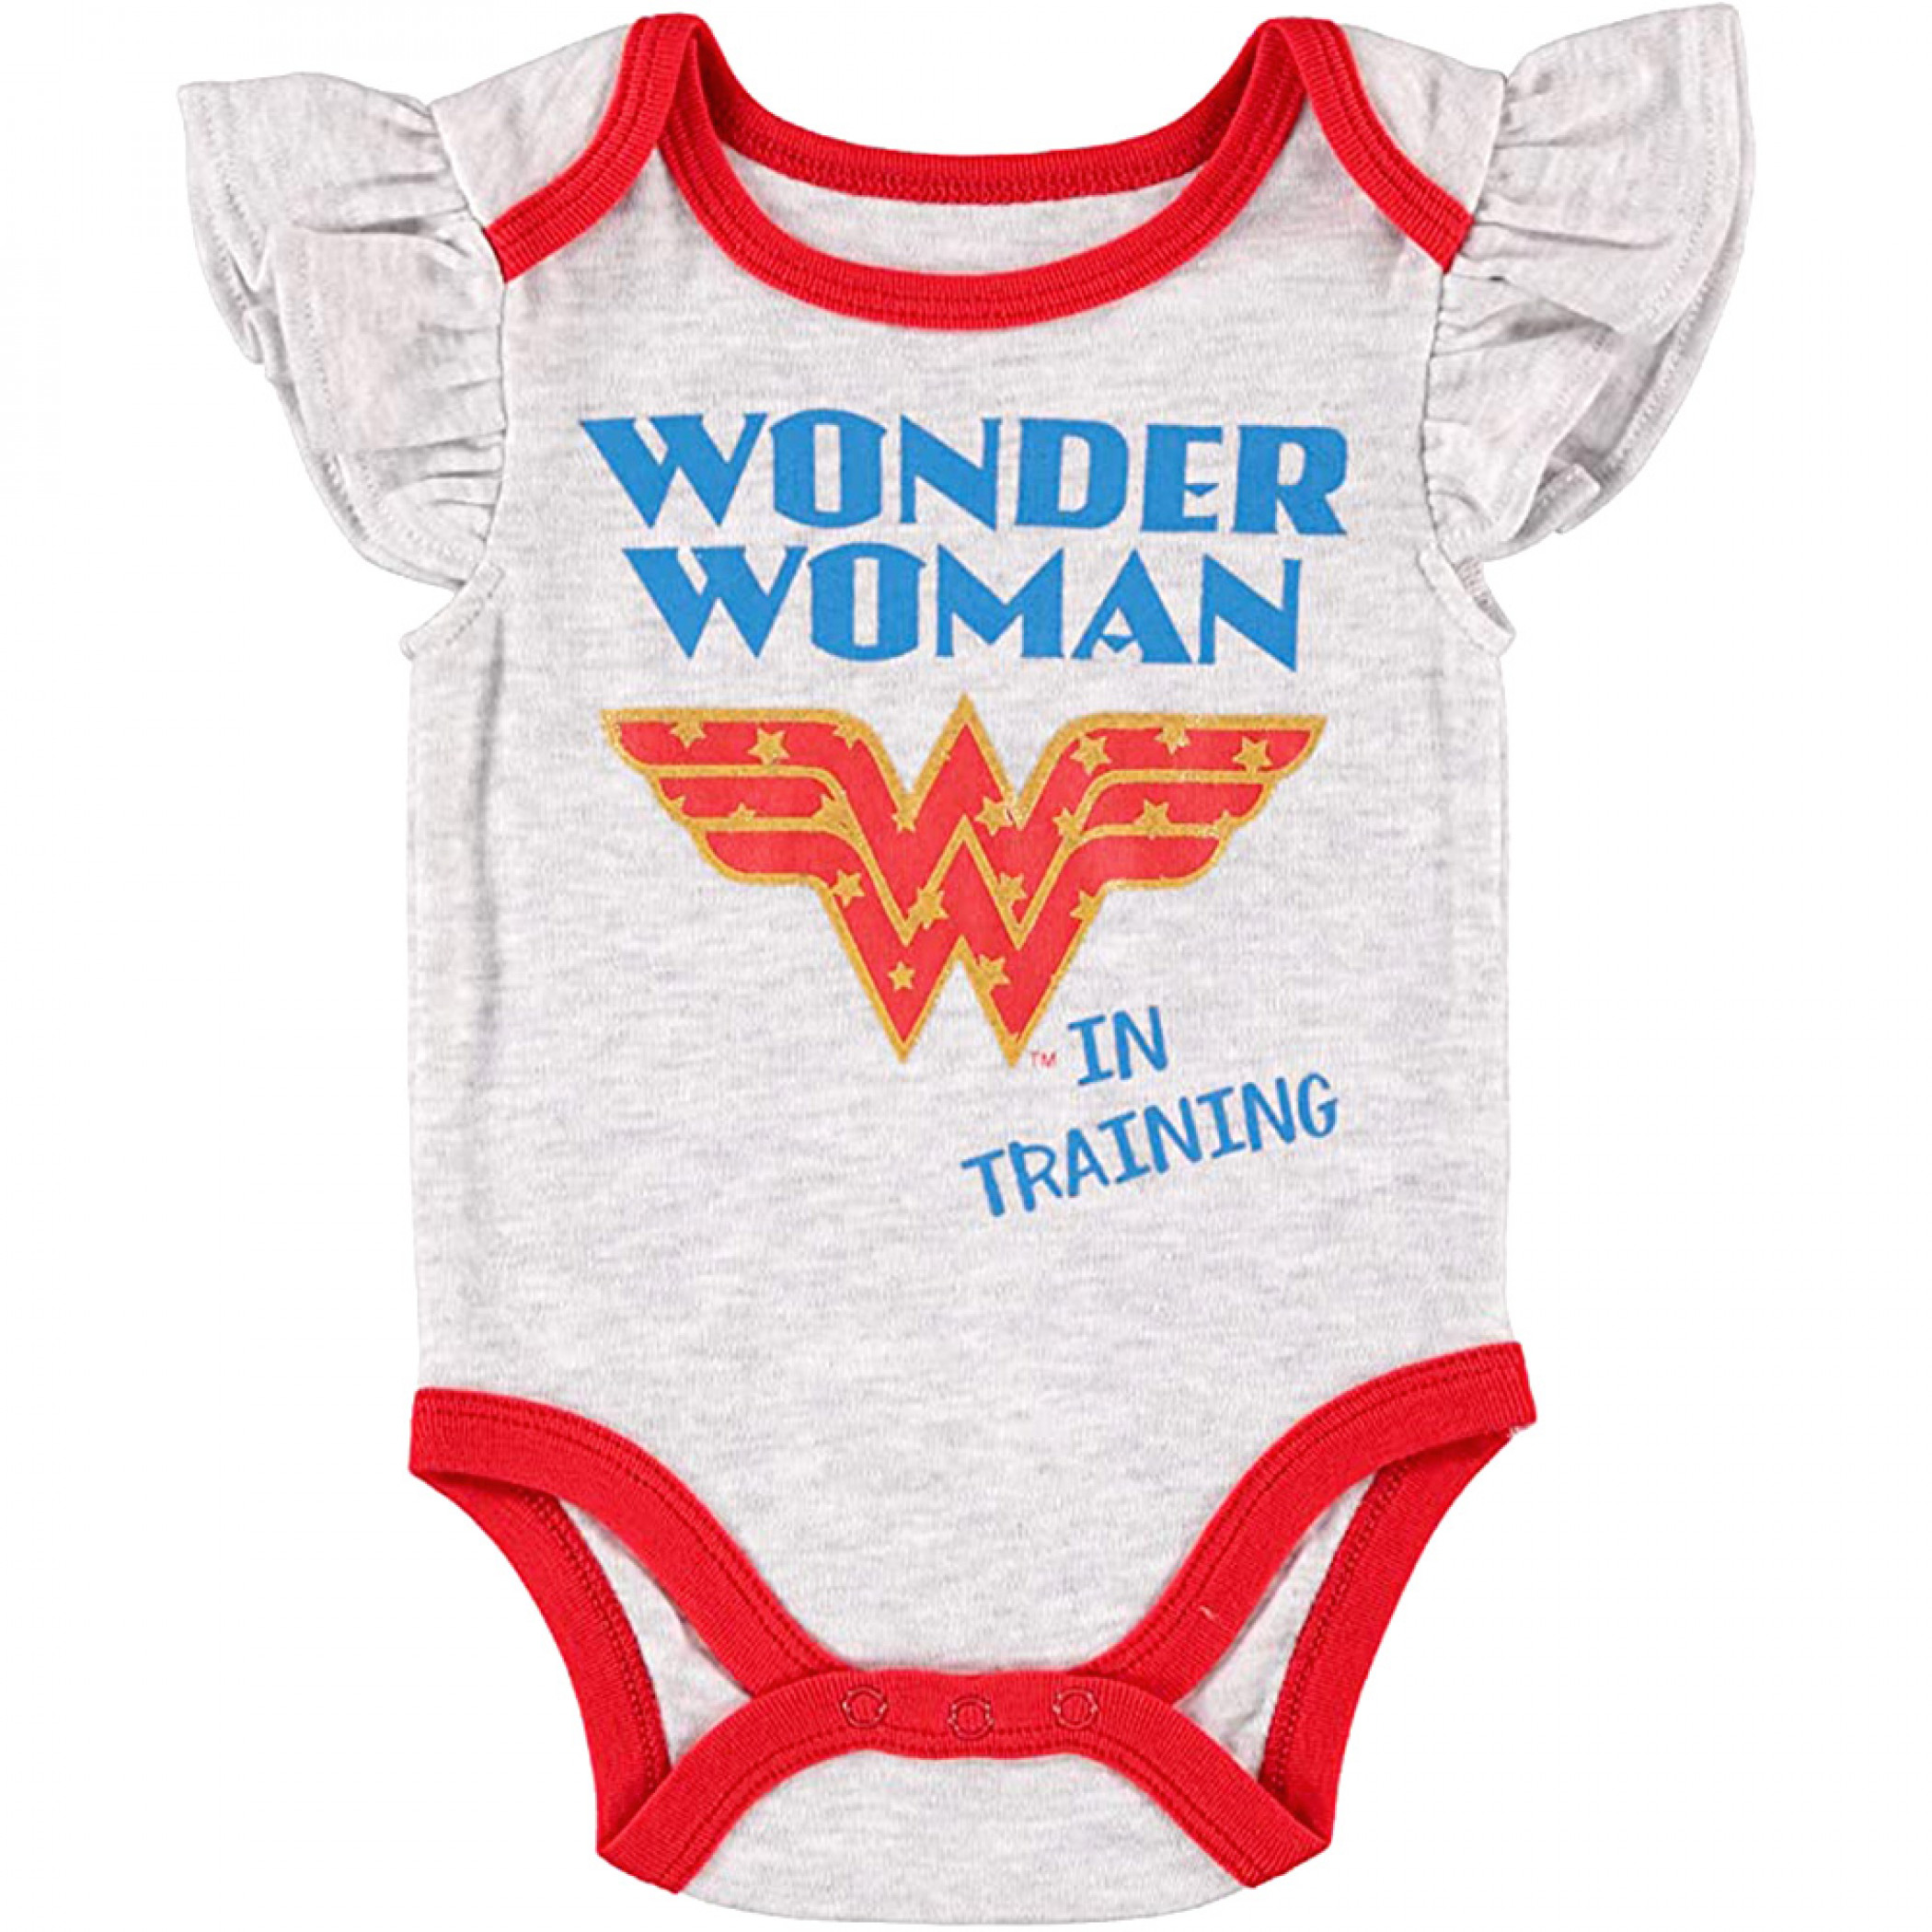 Wonder Woman Logo and Costume Styled Infant Bodysuits 3-Pack